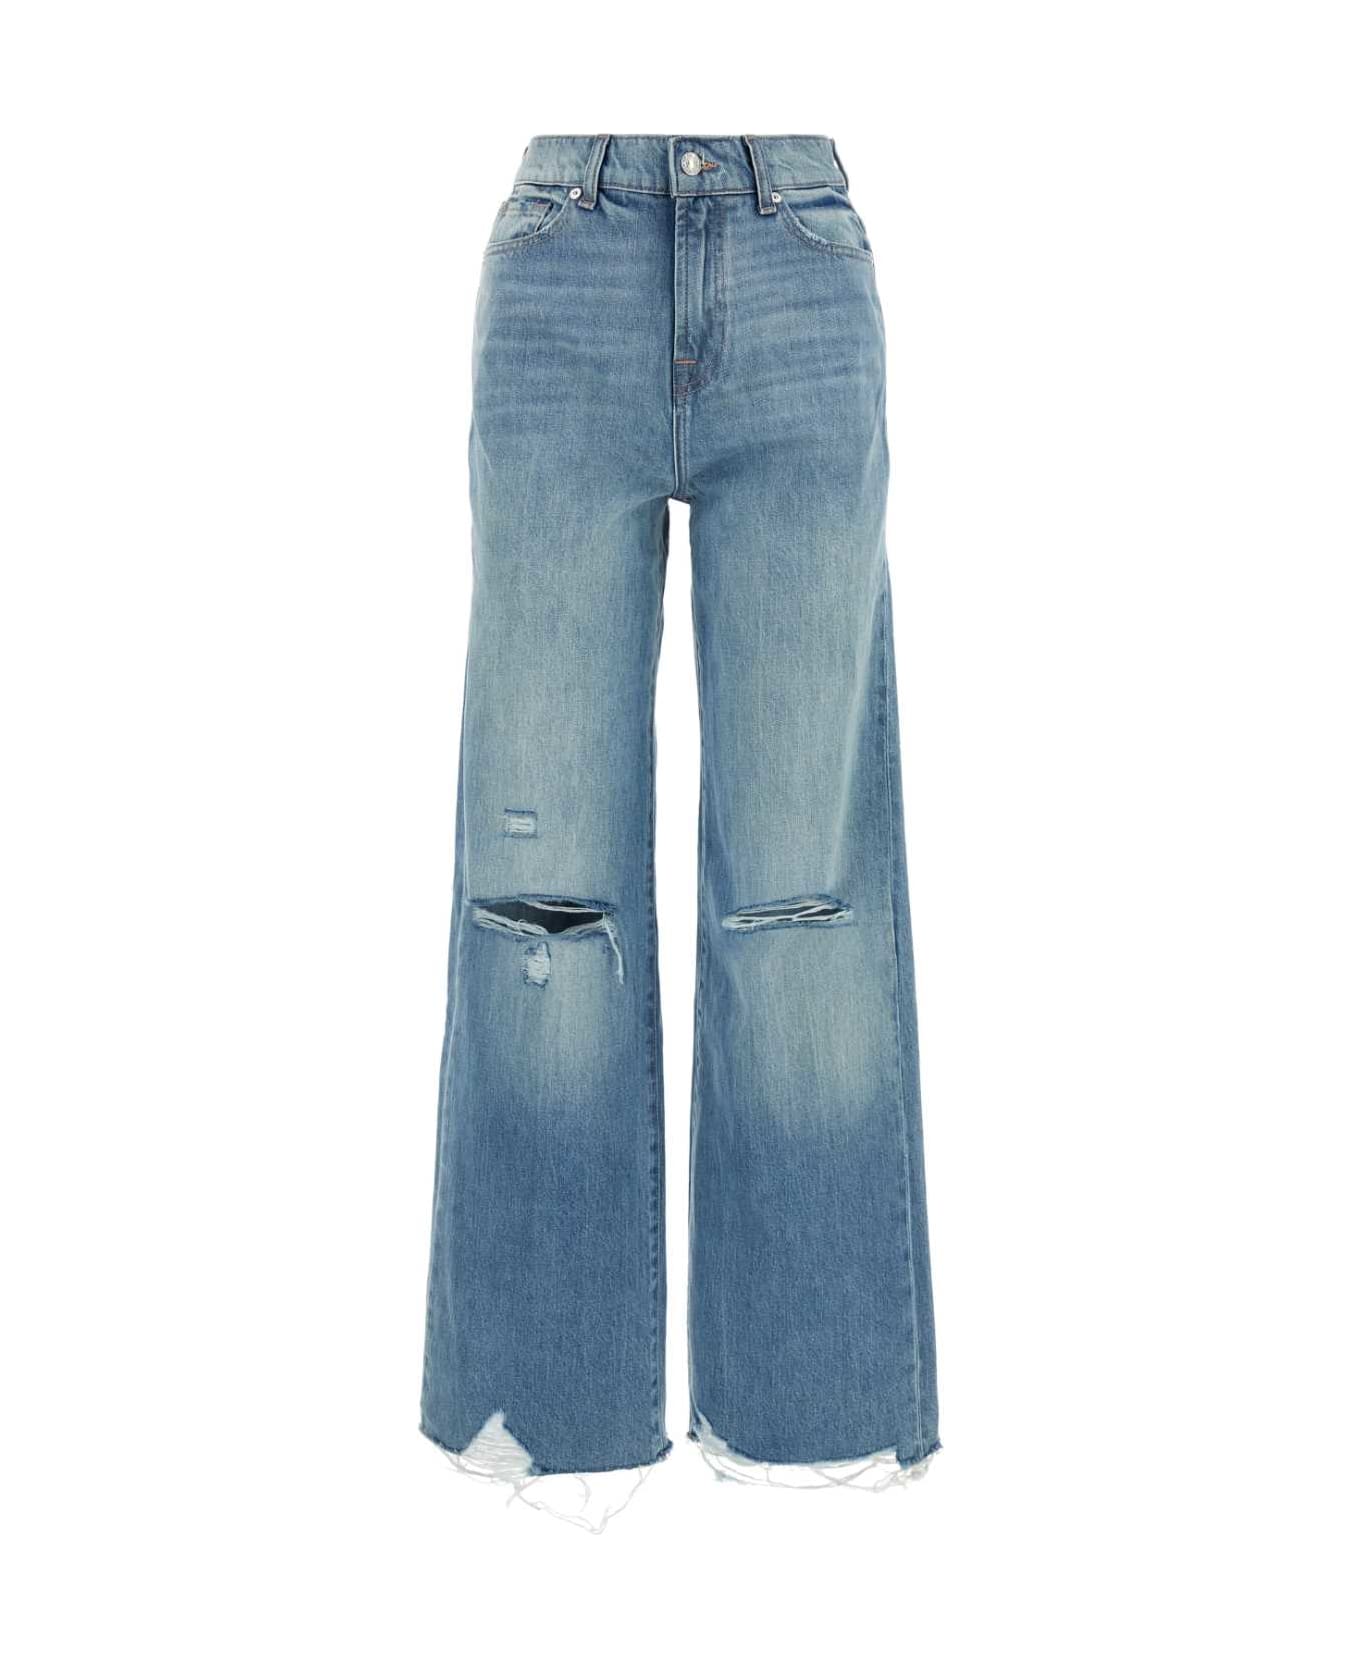 7 For All Mankind Denim Scout Wide-leg Jeans - MIDBLUE